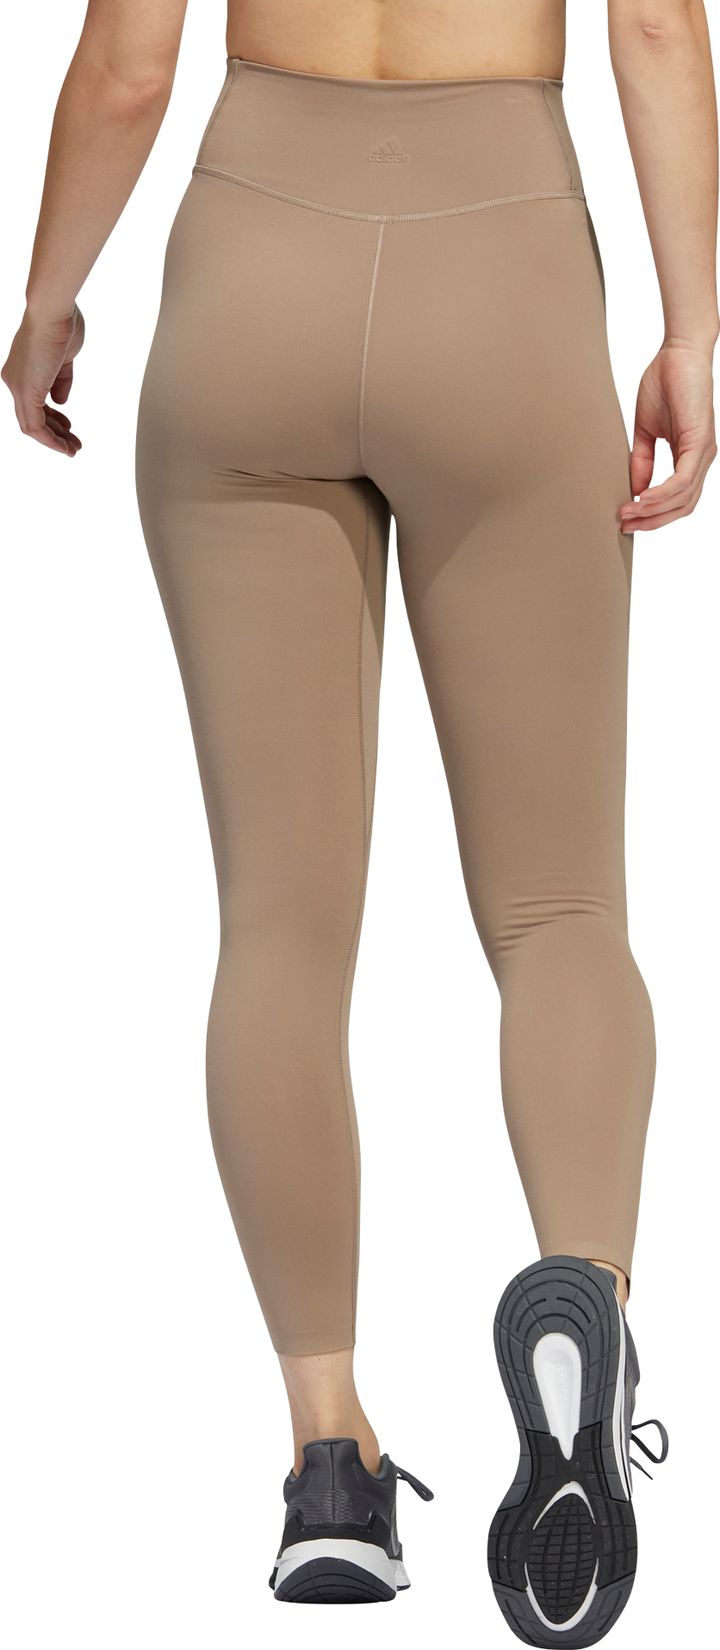 Women's Yoga Luxe Studio 7/8 Tight Chalky Brown Adidas